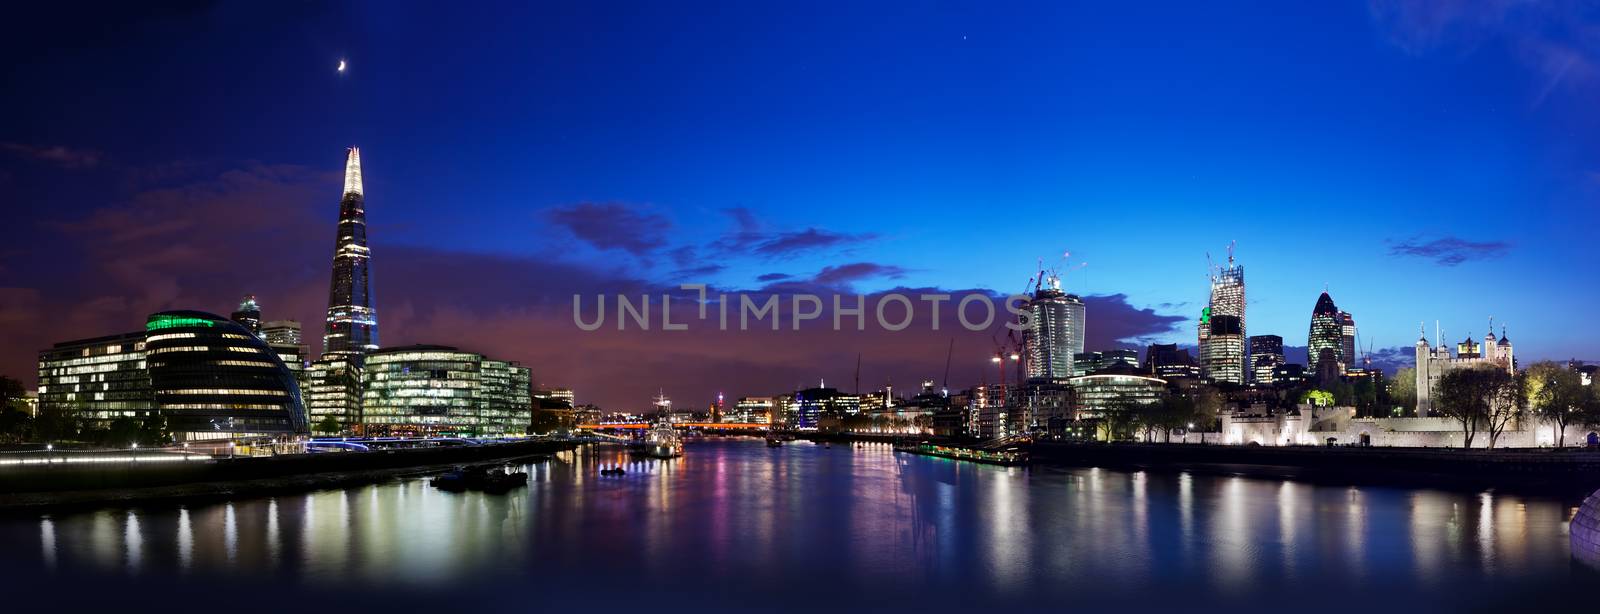 London skyline panorama at night, England the UK. Tower of London, The Shard, City Hall, River Thames as seen from Tower Bridge